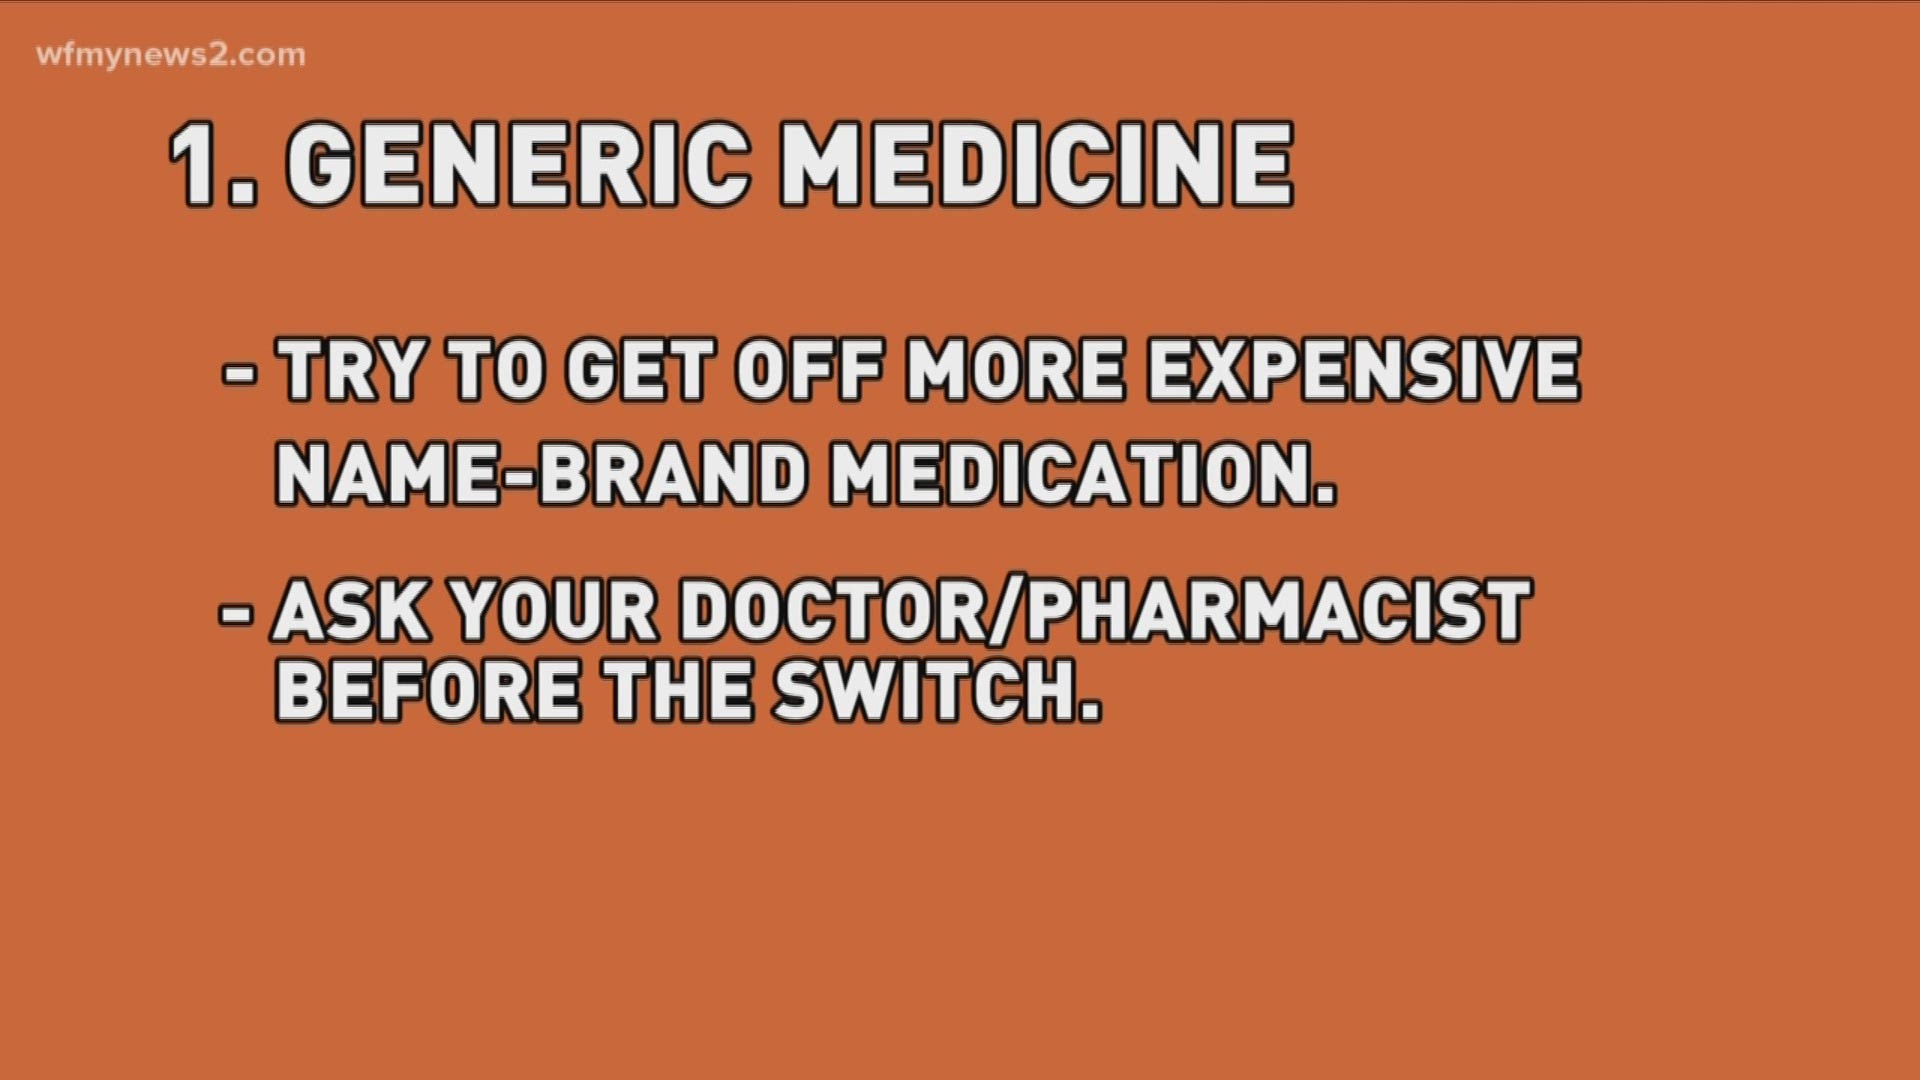 With the cost of prescription medications rising, here are a few ways to find medicine for a lower cost.